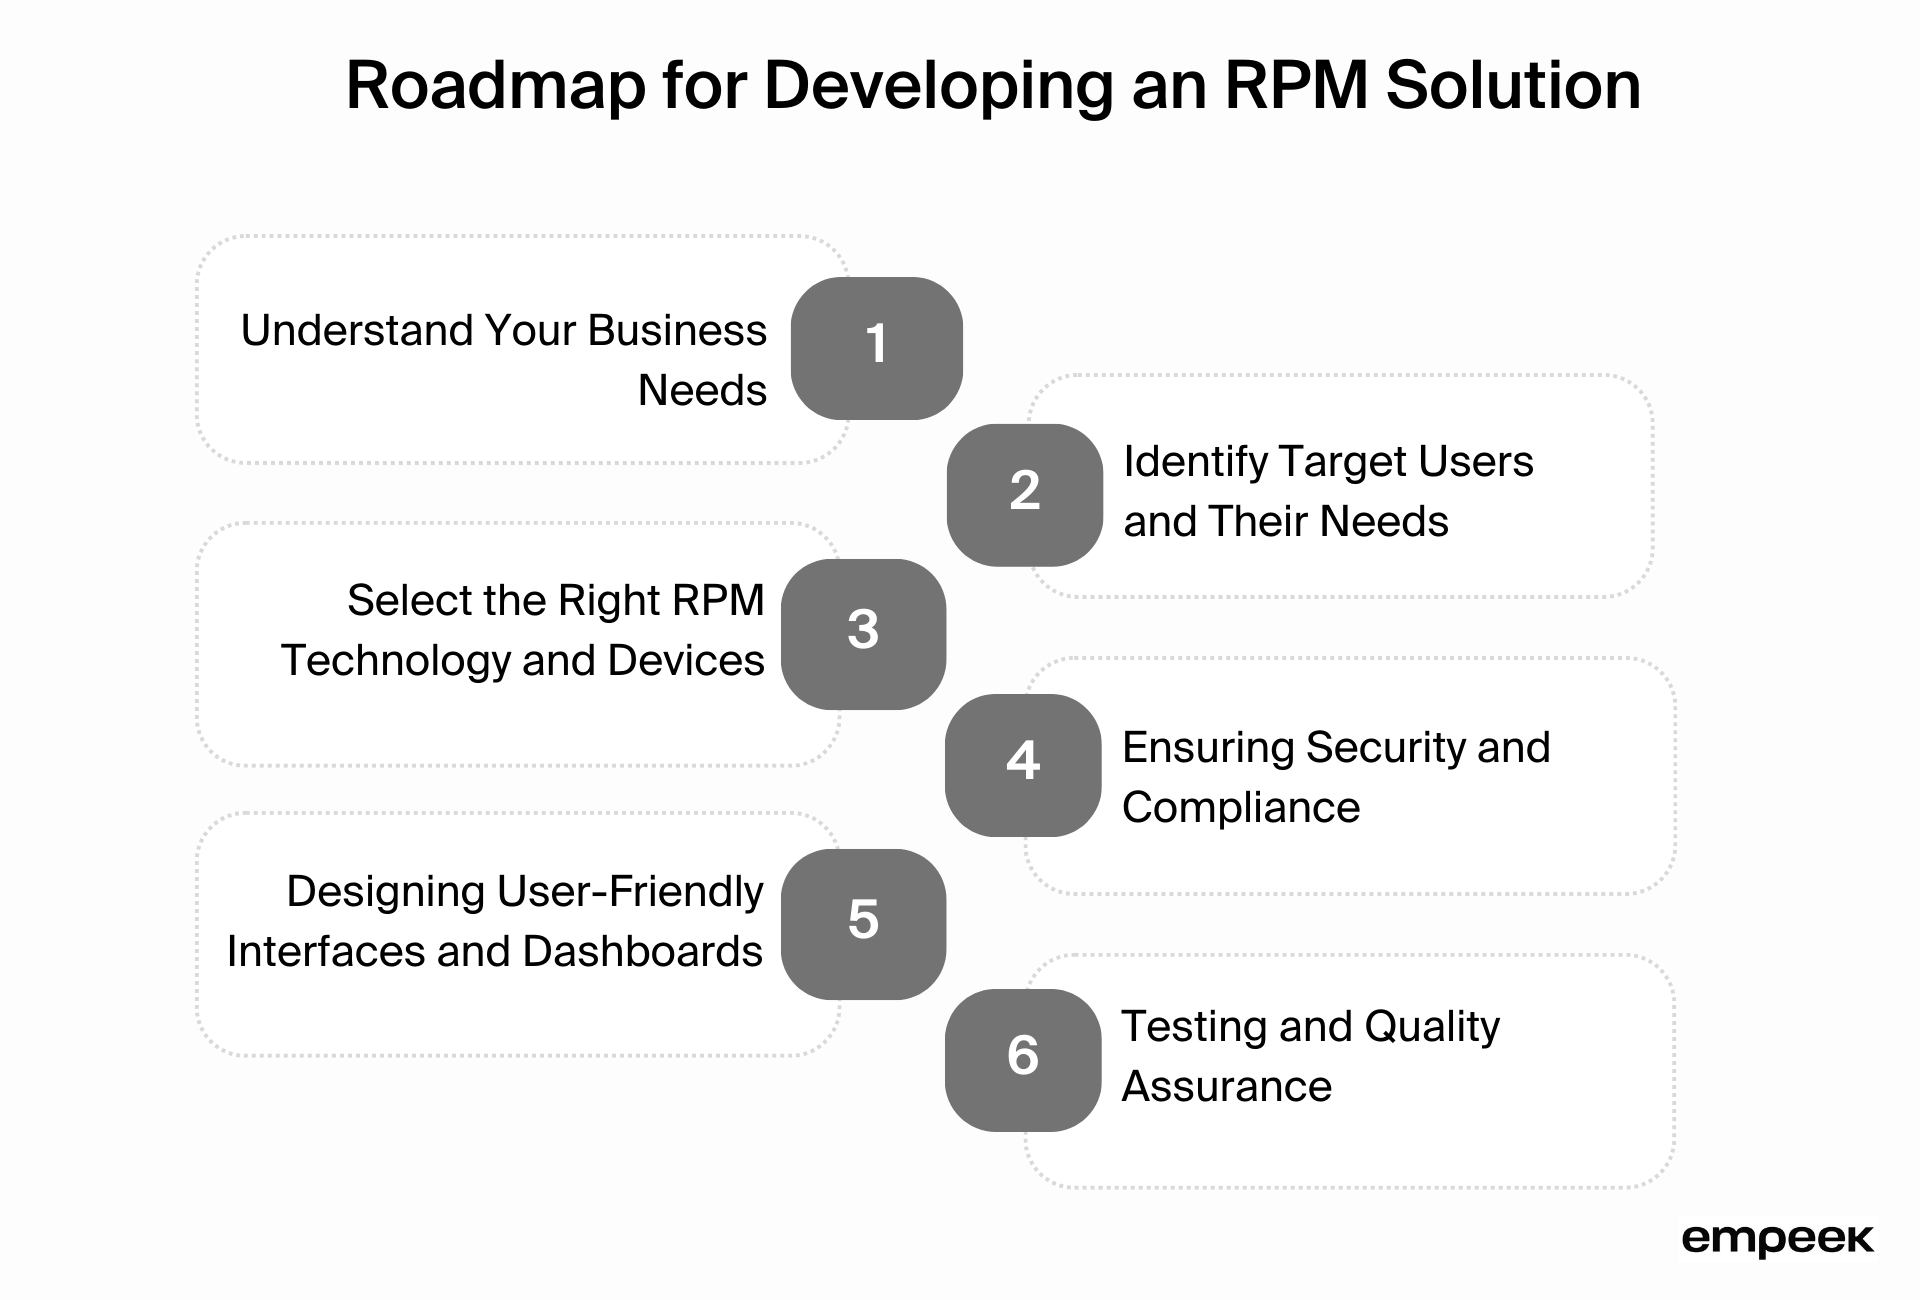 Everything You Should Know About Developing an RPM Solution 5